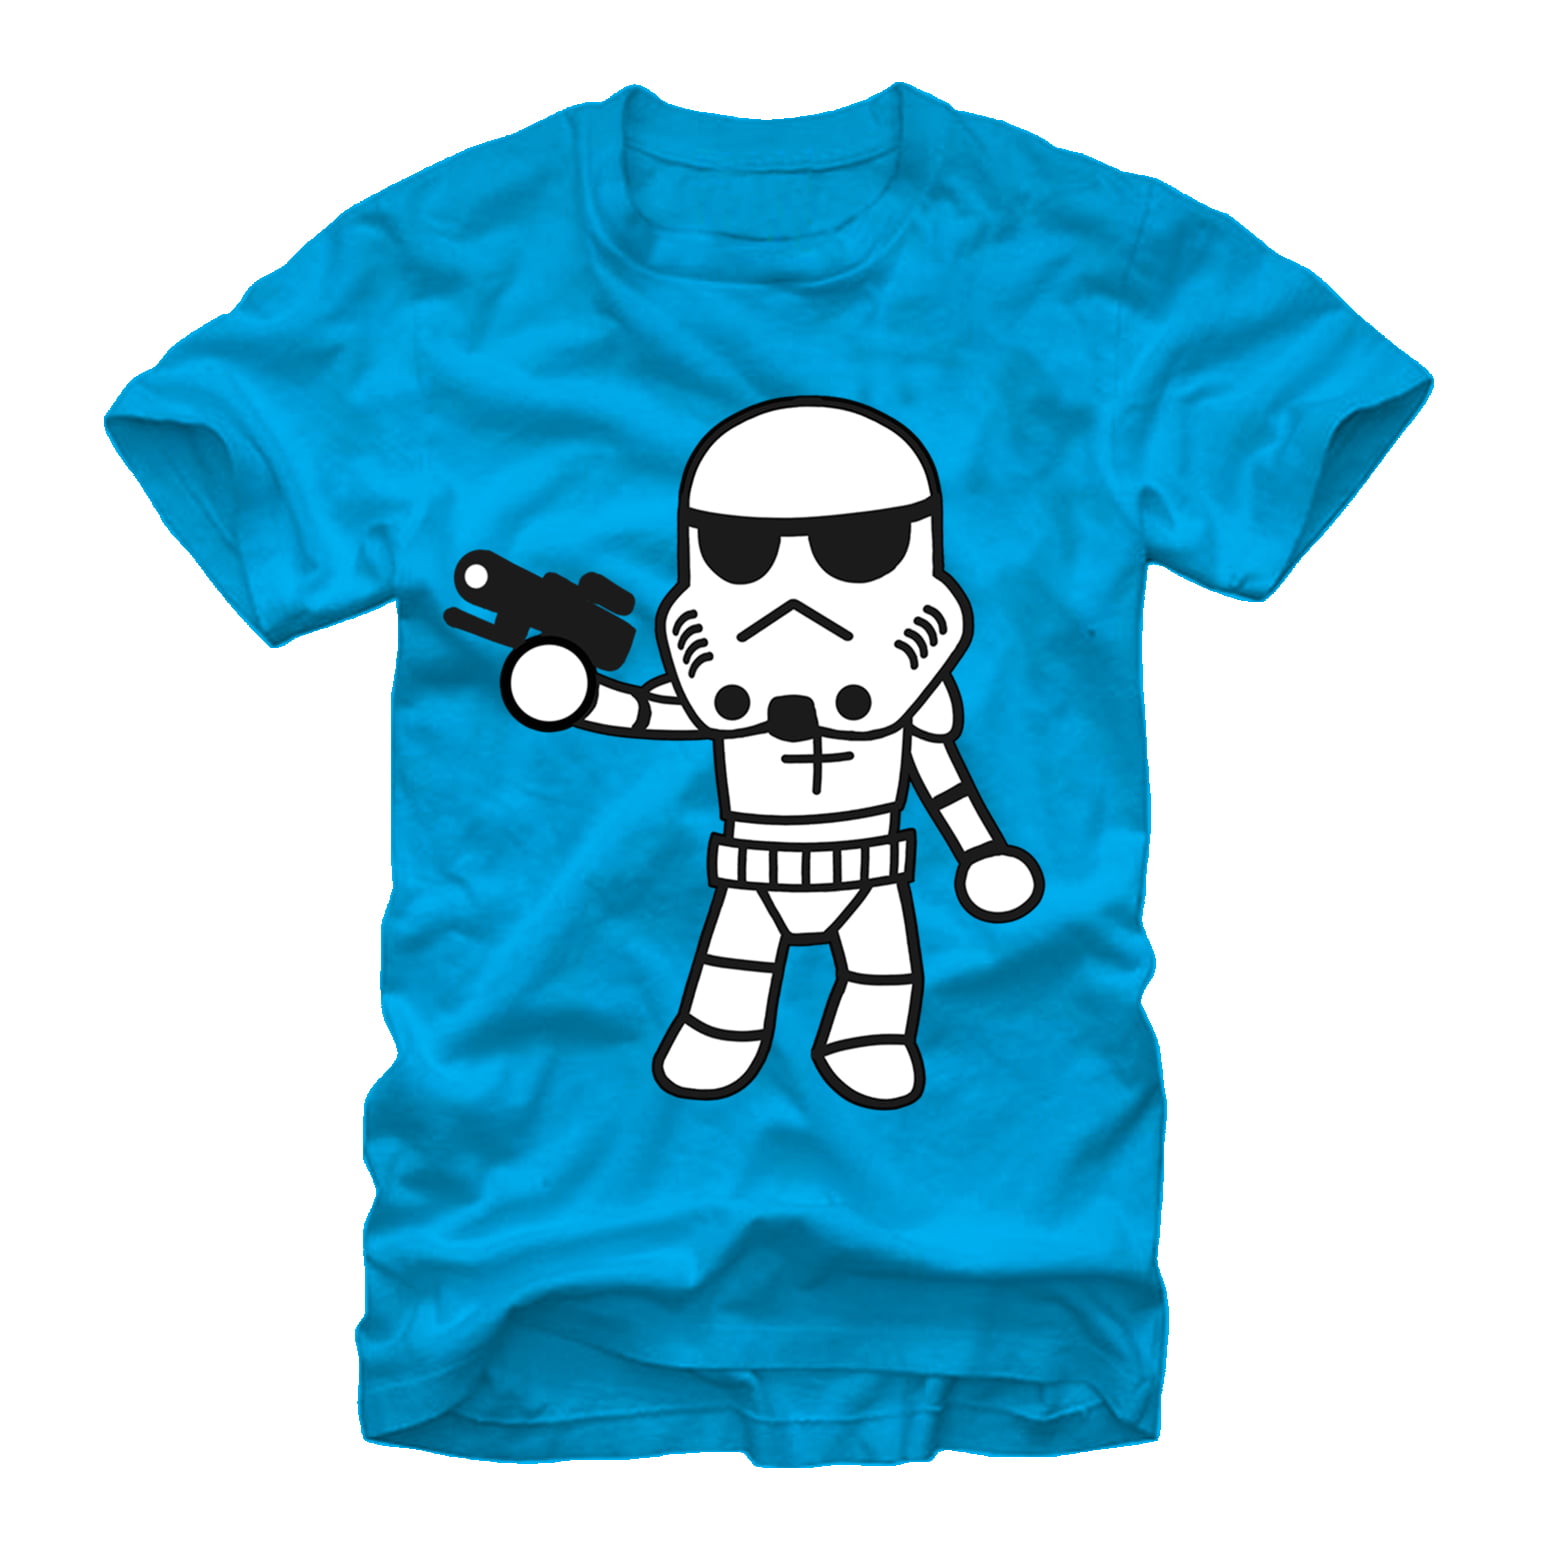 Just Chillin' Star Wars Stormtrooper  Return of the Jedi Multiple color shirts 